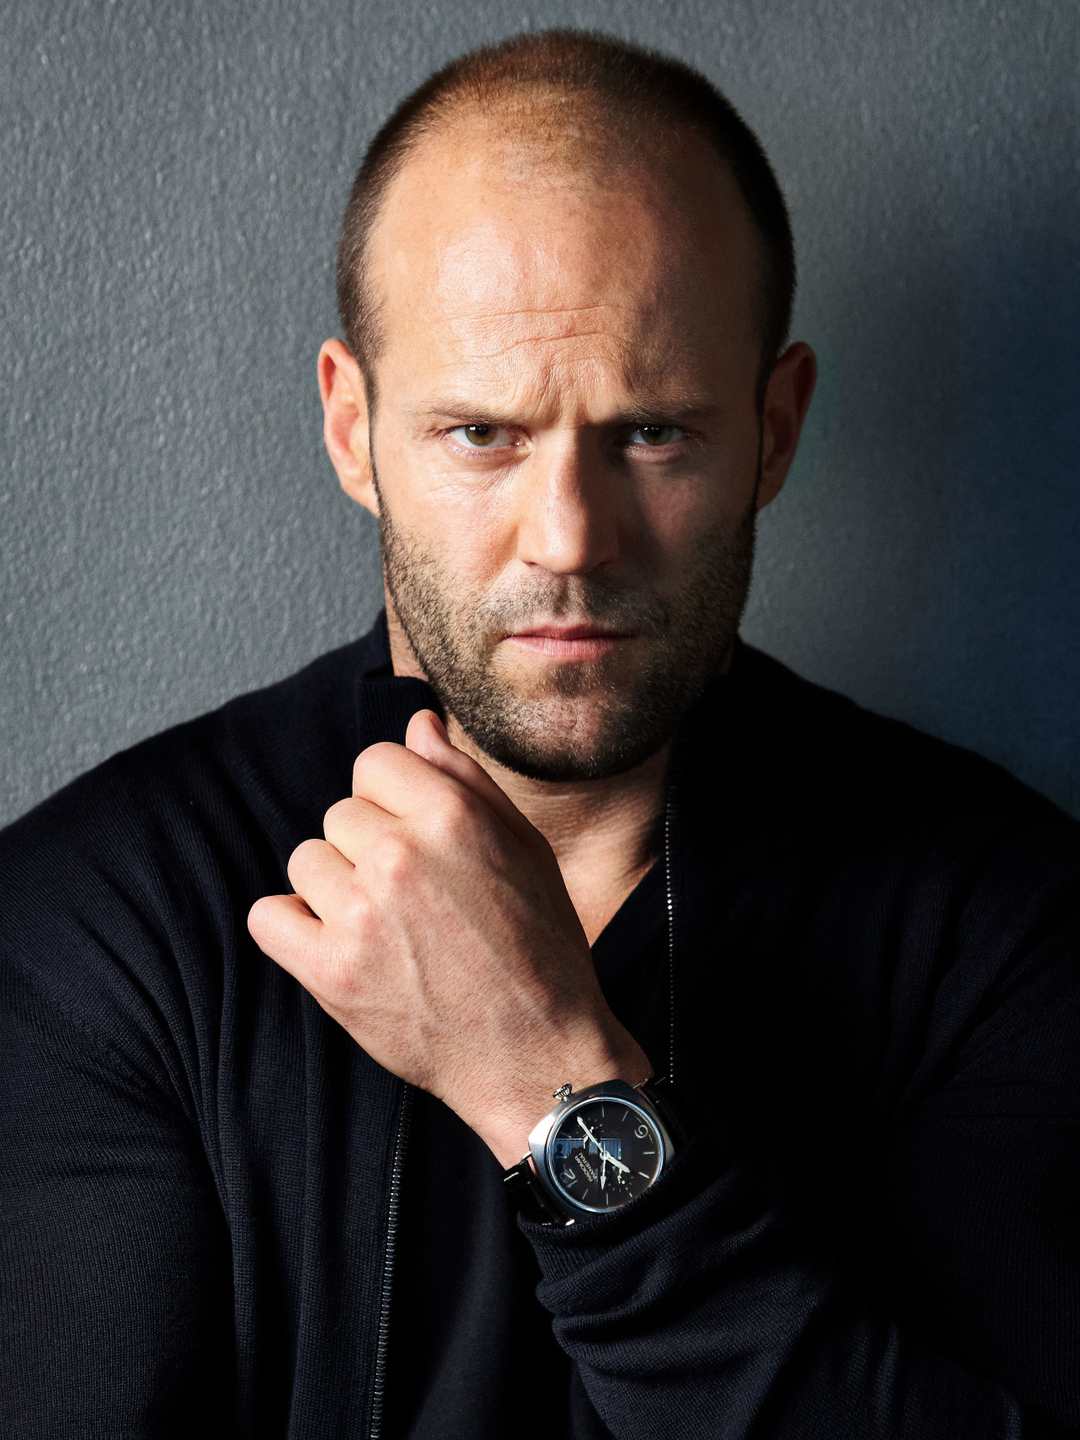 Jason Statham who are his parents